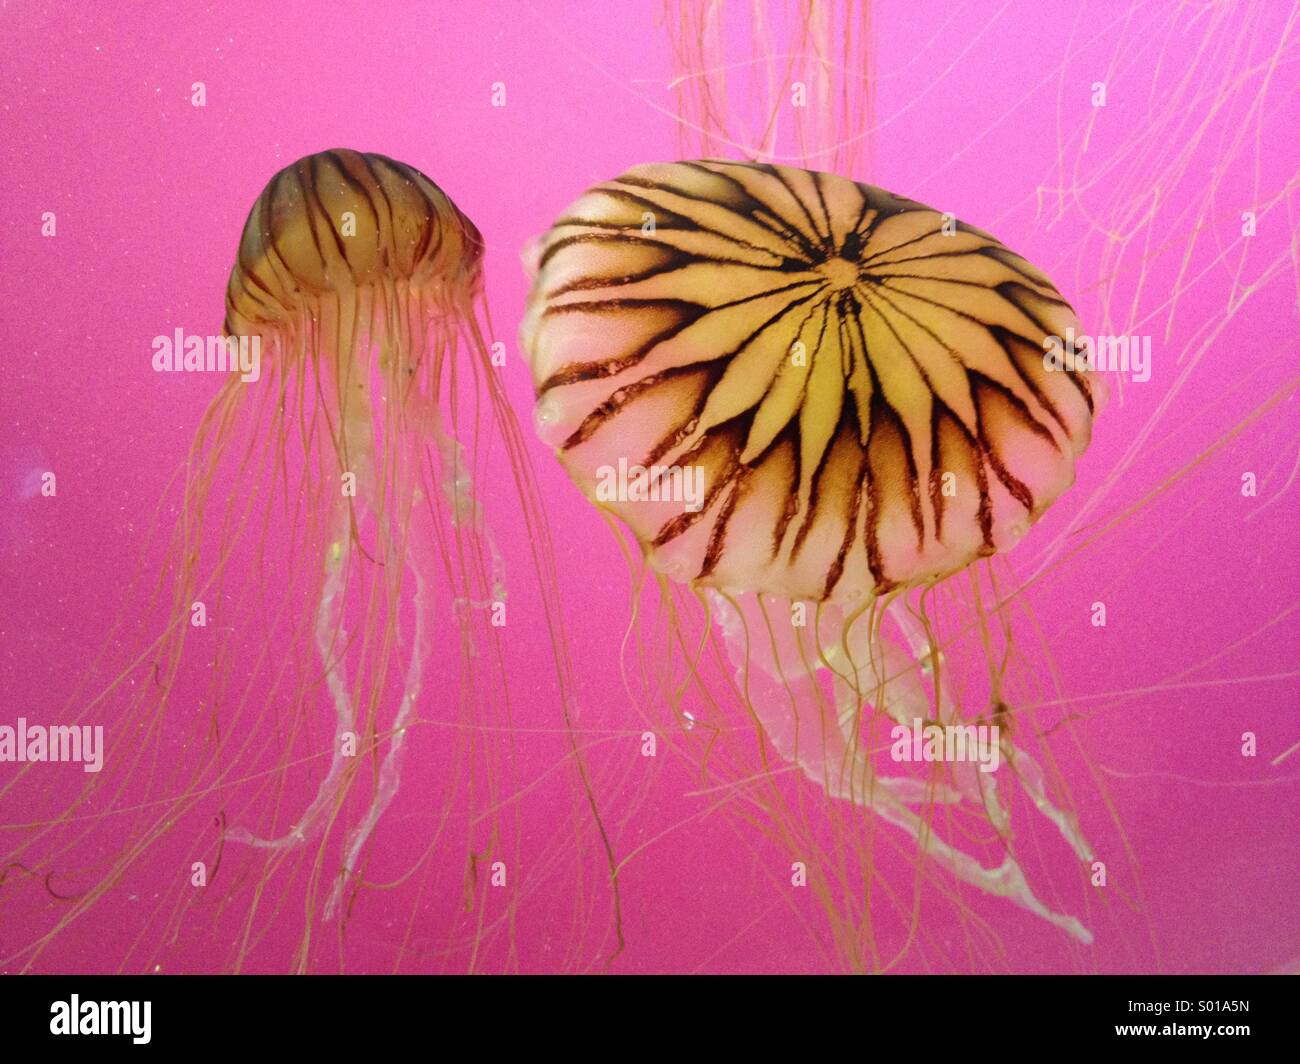 Jellyfish swimming in a display tank with a pink light Stock Photo